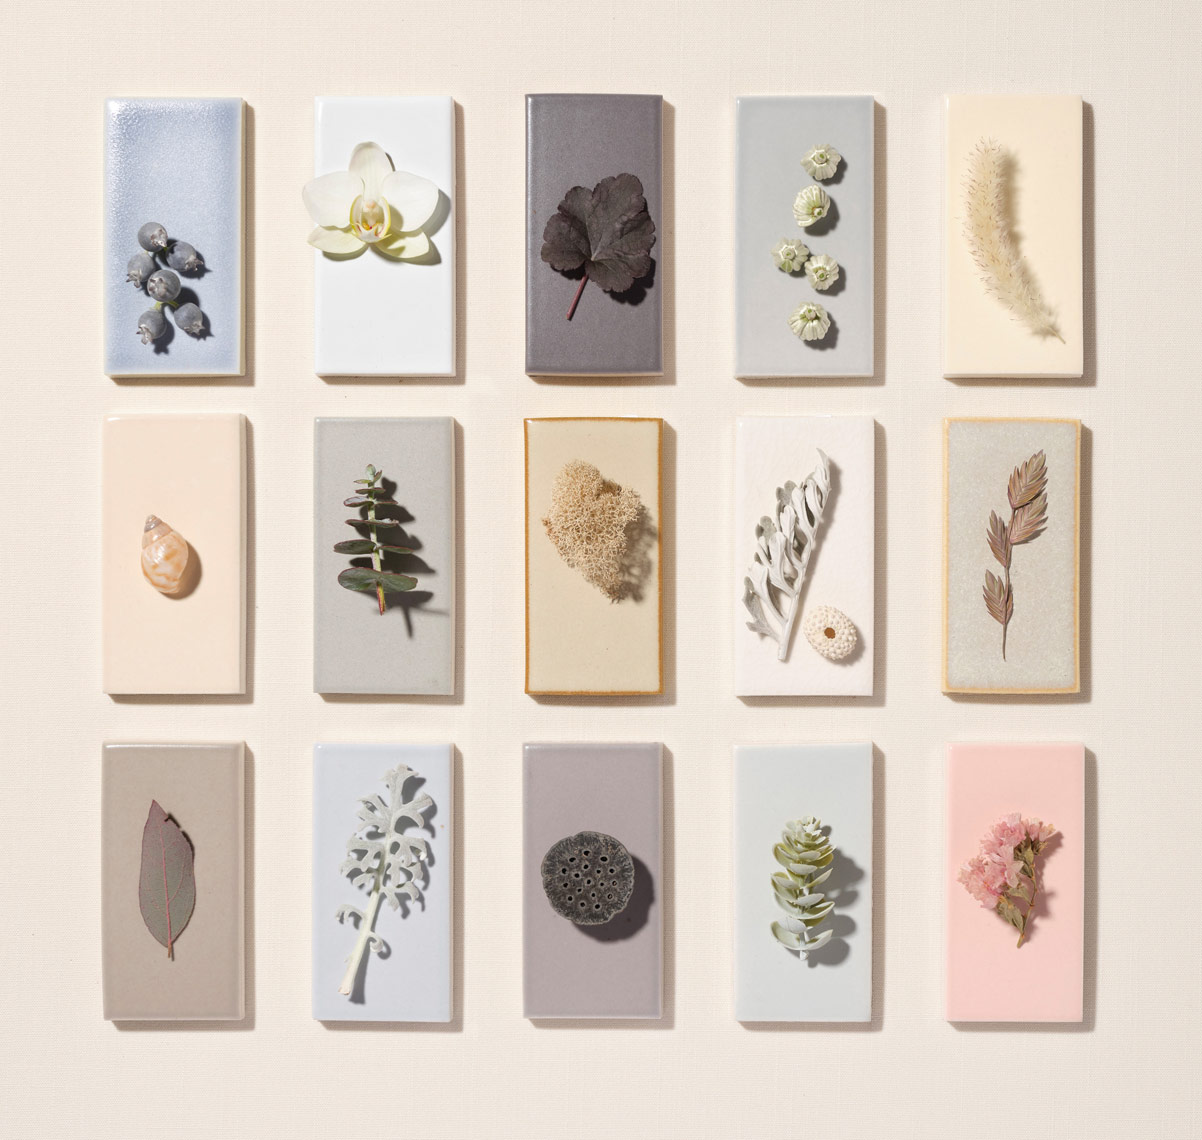 gridded collection of pastel colored ceramic tiles with dainty objects upon them Ann sacks tile